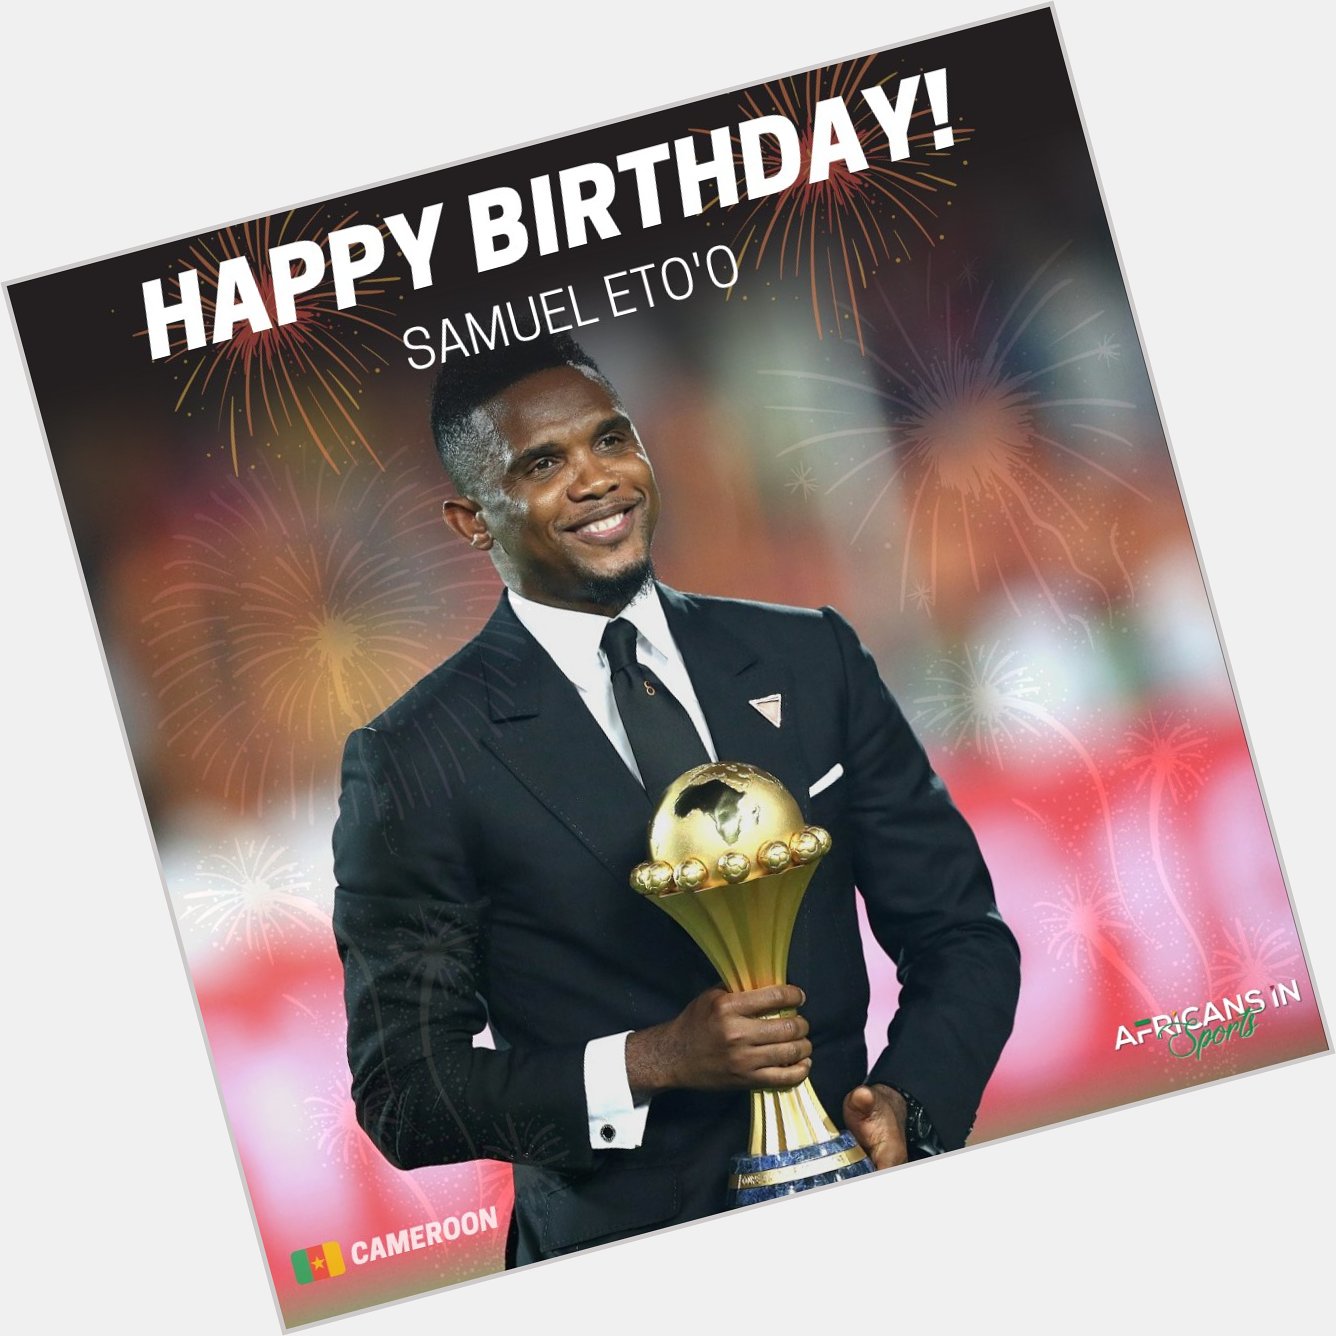 Happy Birthday to Cameroonian Football Legend, Samuel Eto\o  - Send him love via the comment section 